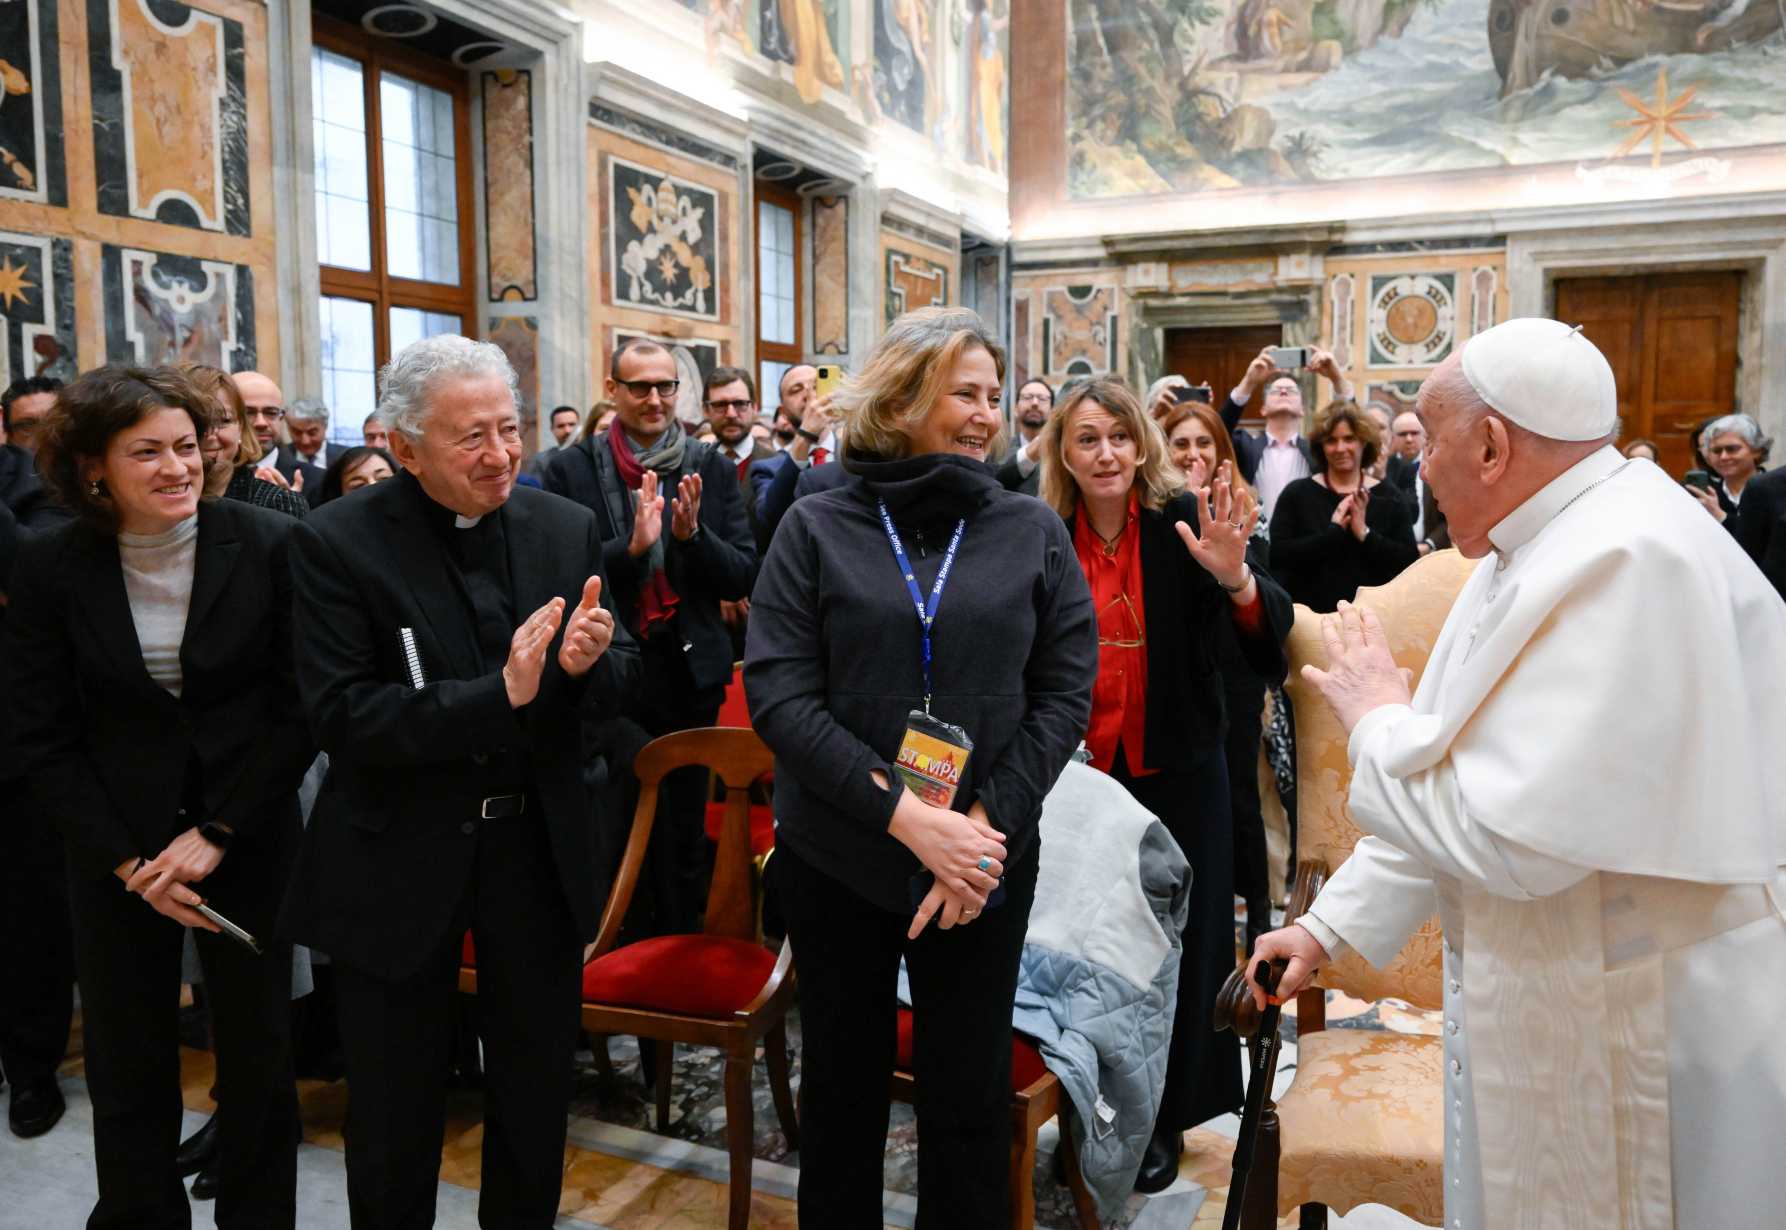 Reporting on the church should not be 'gossip,' pope tells journalists